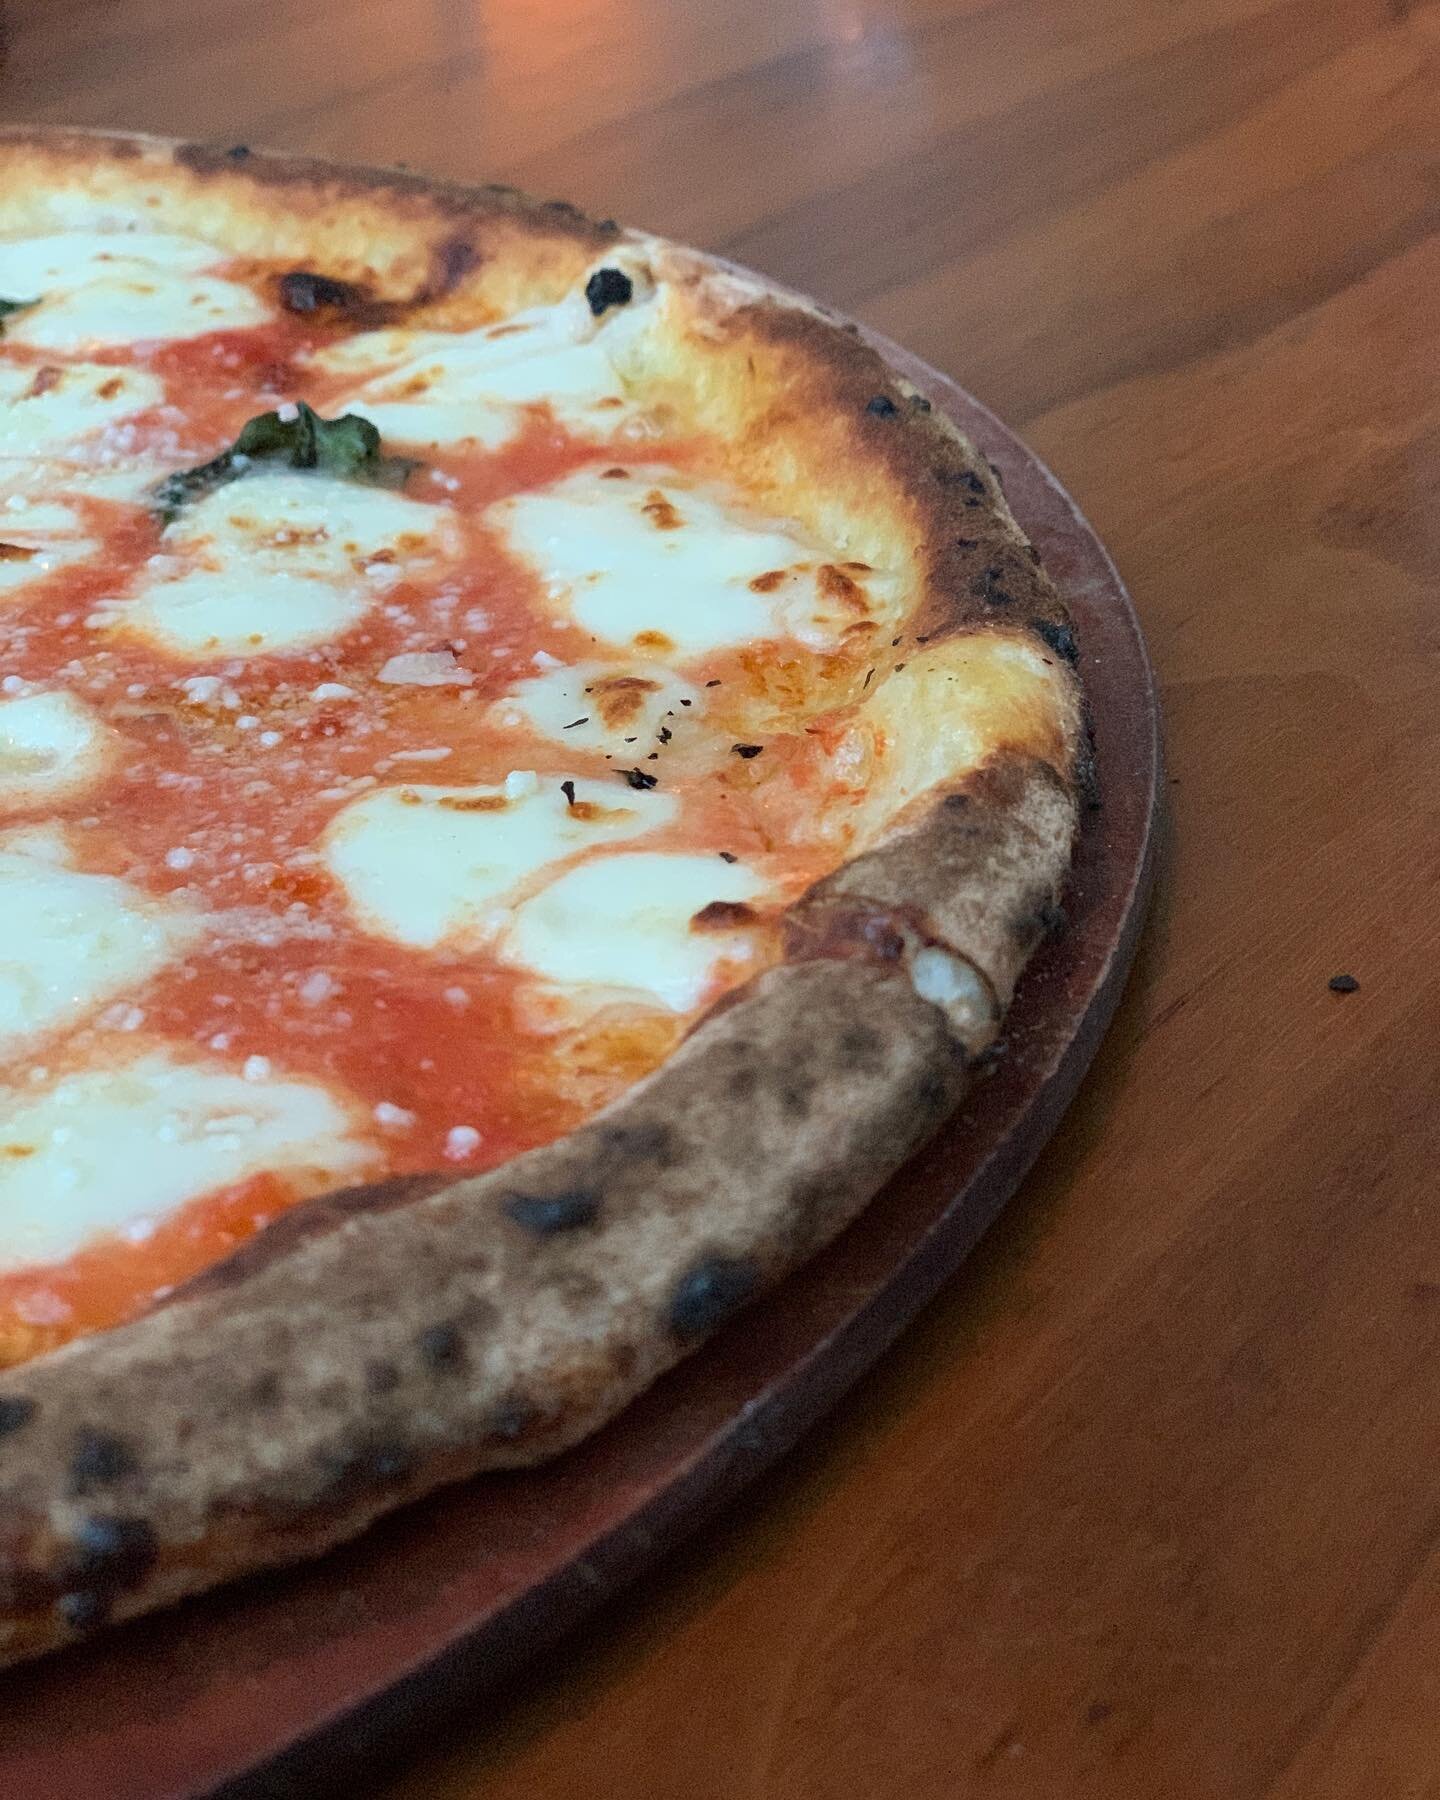 I just want someone to look at me the way I&rsquo;m looking at this pizza 😍
#cinqueterreseattle #neapolitanpizza
#eatingoodintheneighborhood #southlakeunion